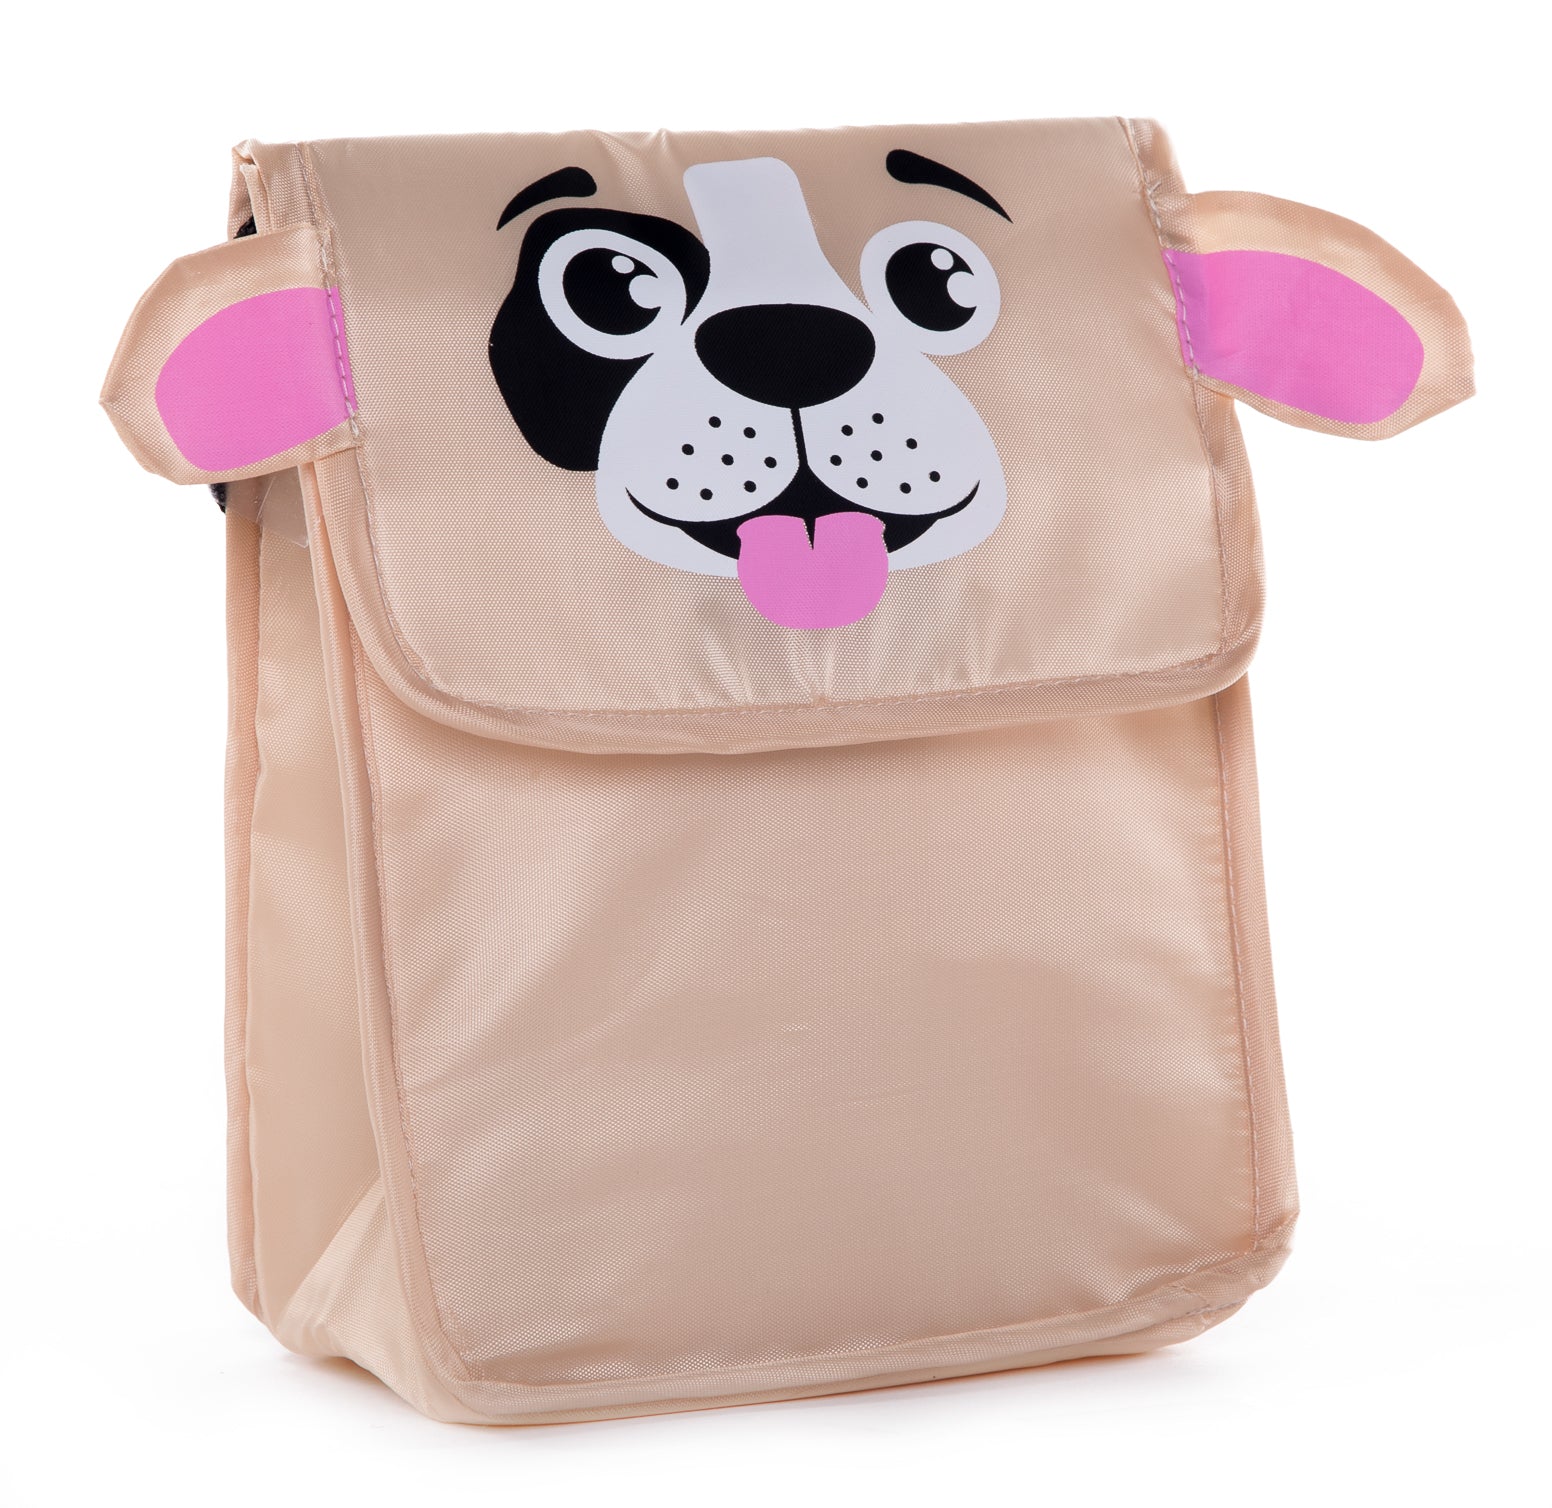 Cult Factory Puppy Soft Toy of Dog Doggy Pet Animal Cute Handbag for Girls,  Kids Playtime Toys